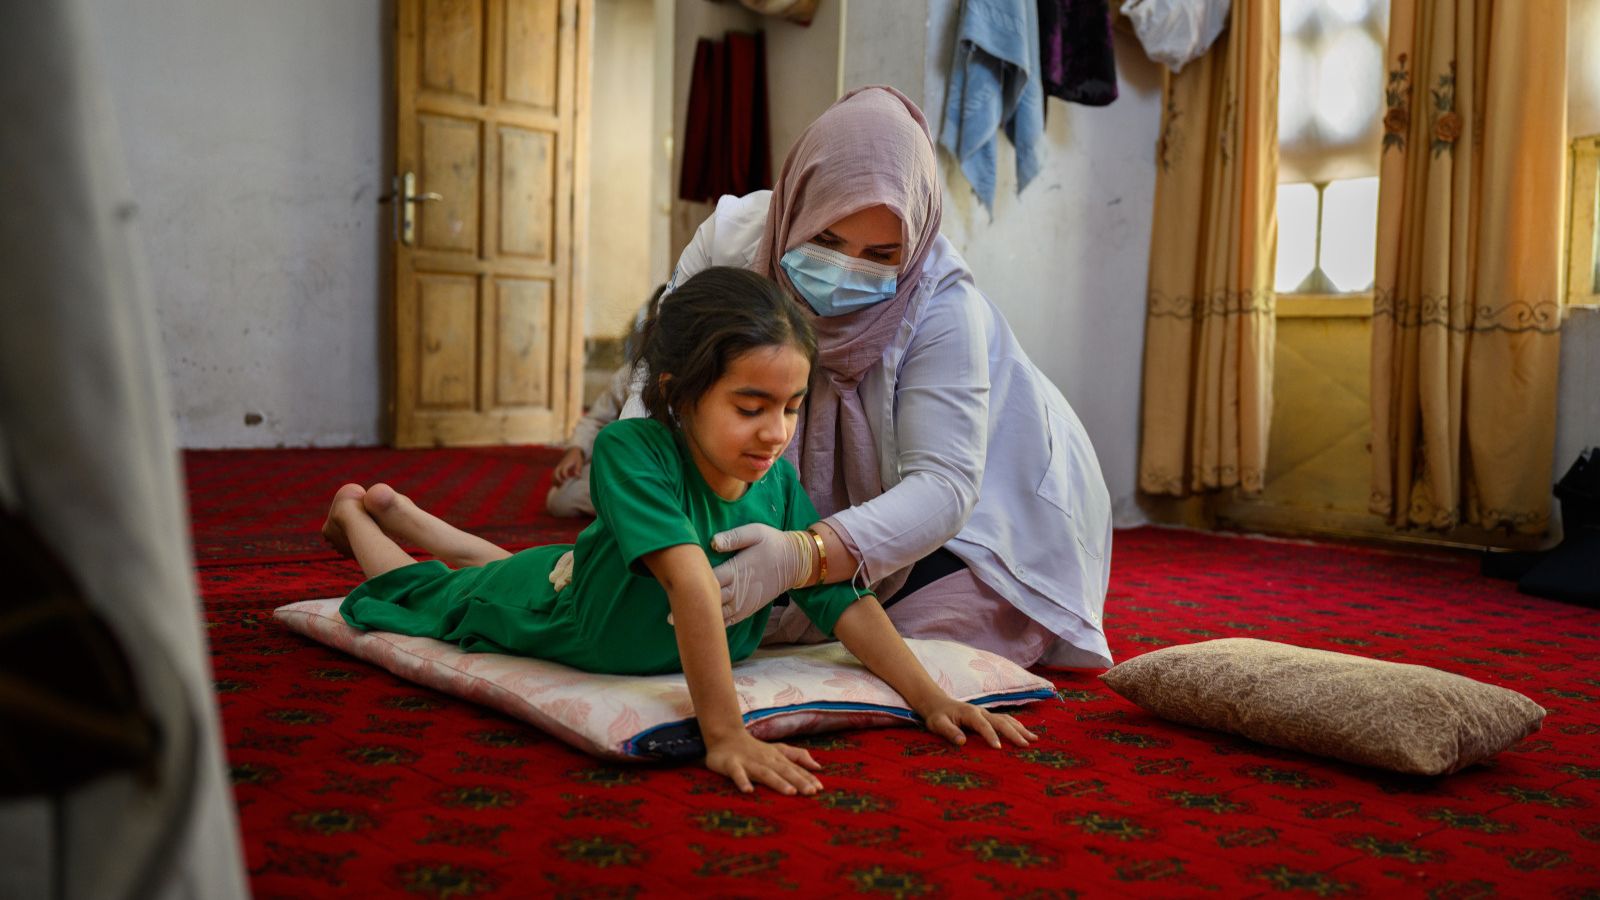 An Afghan girl wearing a green outfit lies on her stomach on a cushion pushing her upper body off the floor. A rehabilitation specialist wearing a head scarf and mask supports her chest.